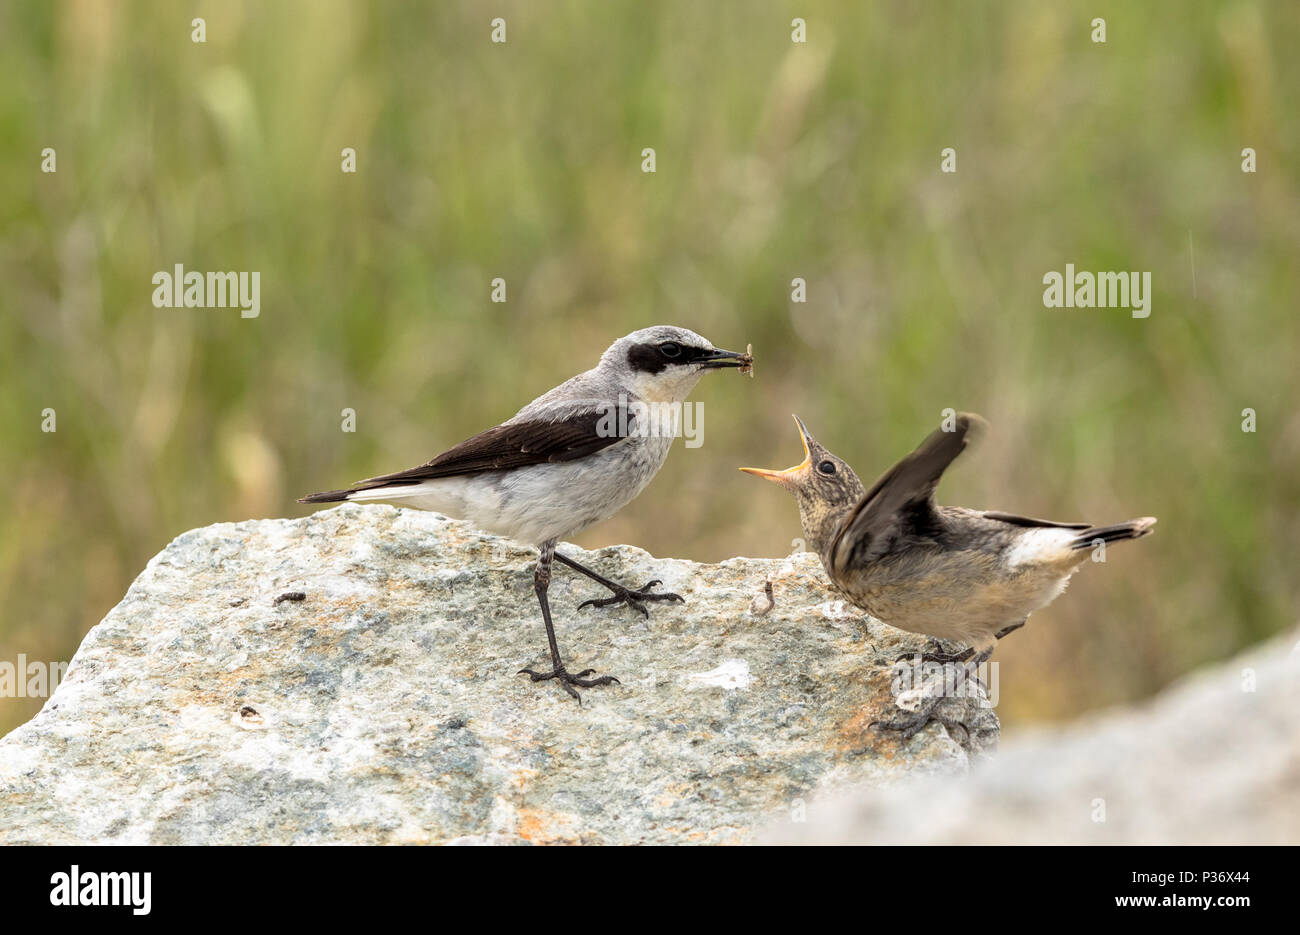 Northern wheatear, Oenanthe oenanthe, a male bird in breeding plumage, about to feed its young fledgling with an insect. Stock Photo